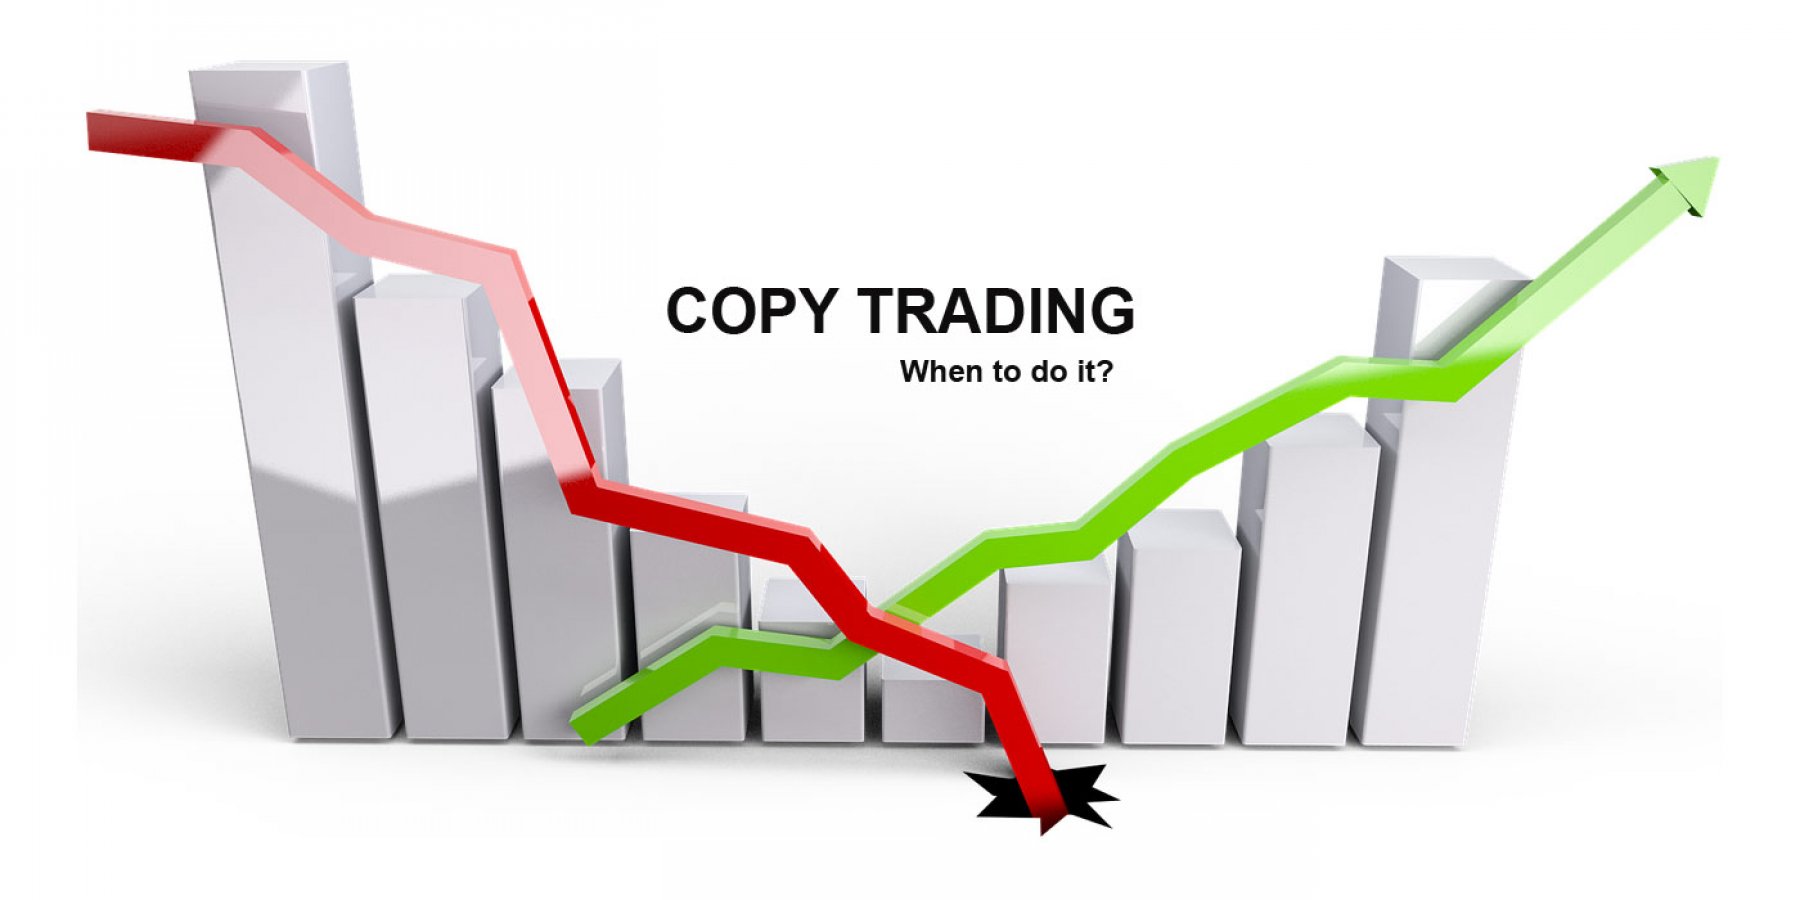 Copytrading - when to do it